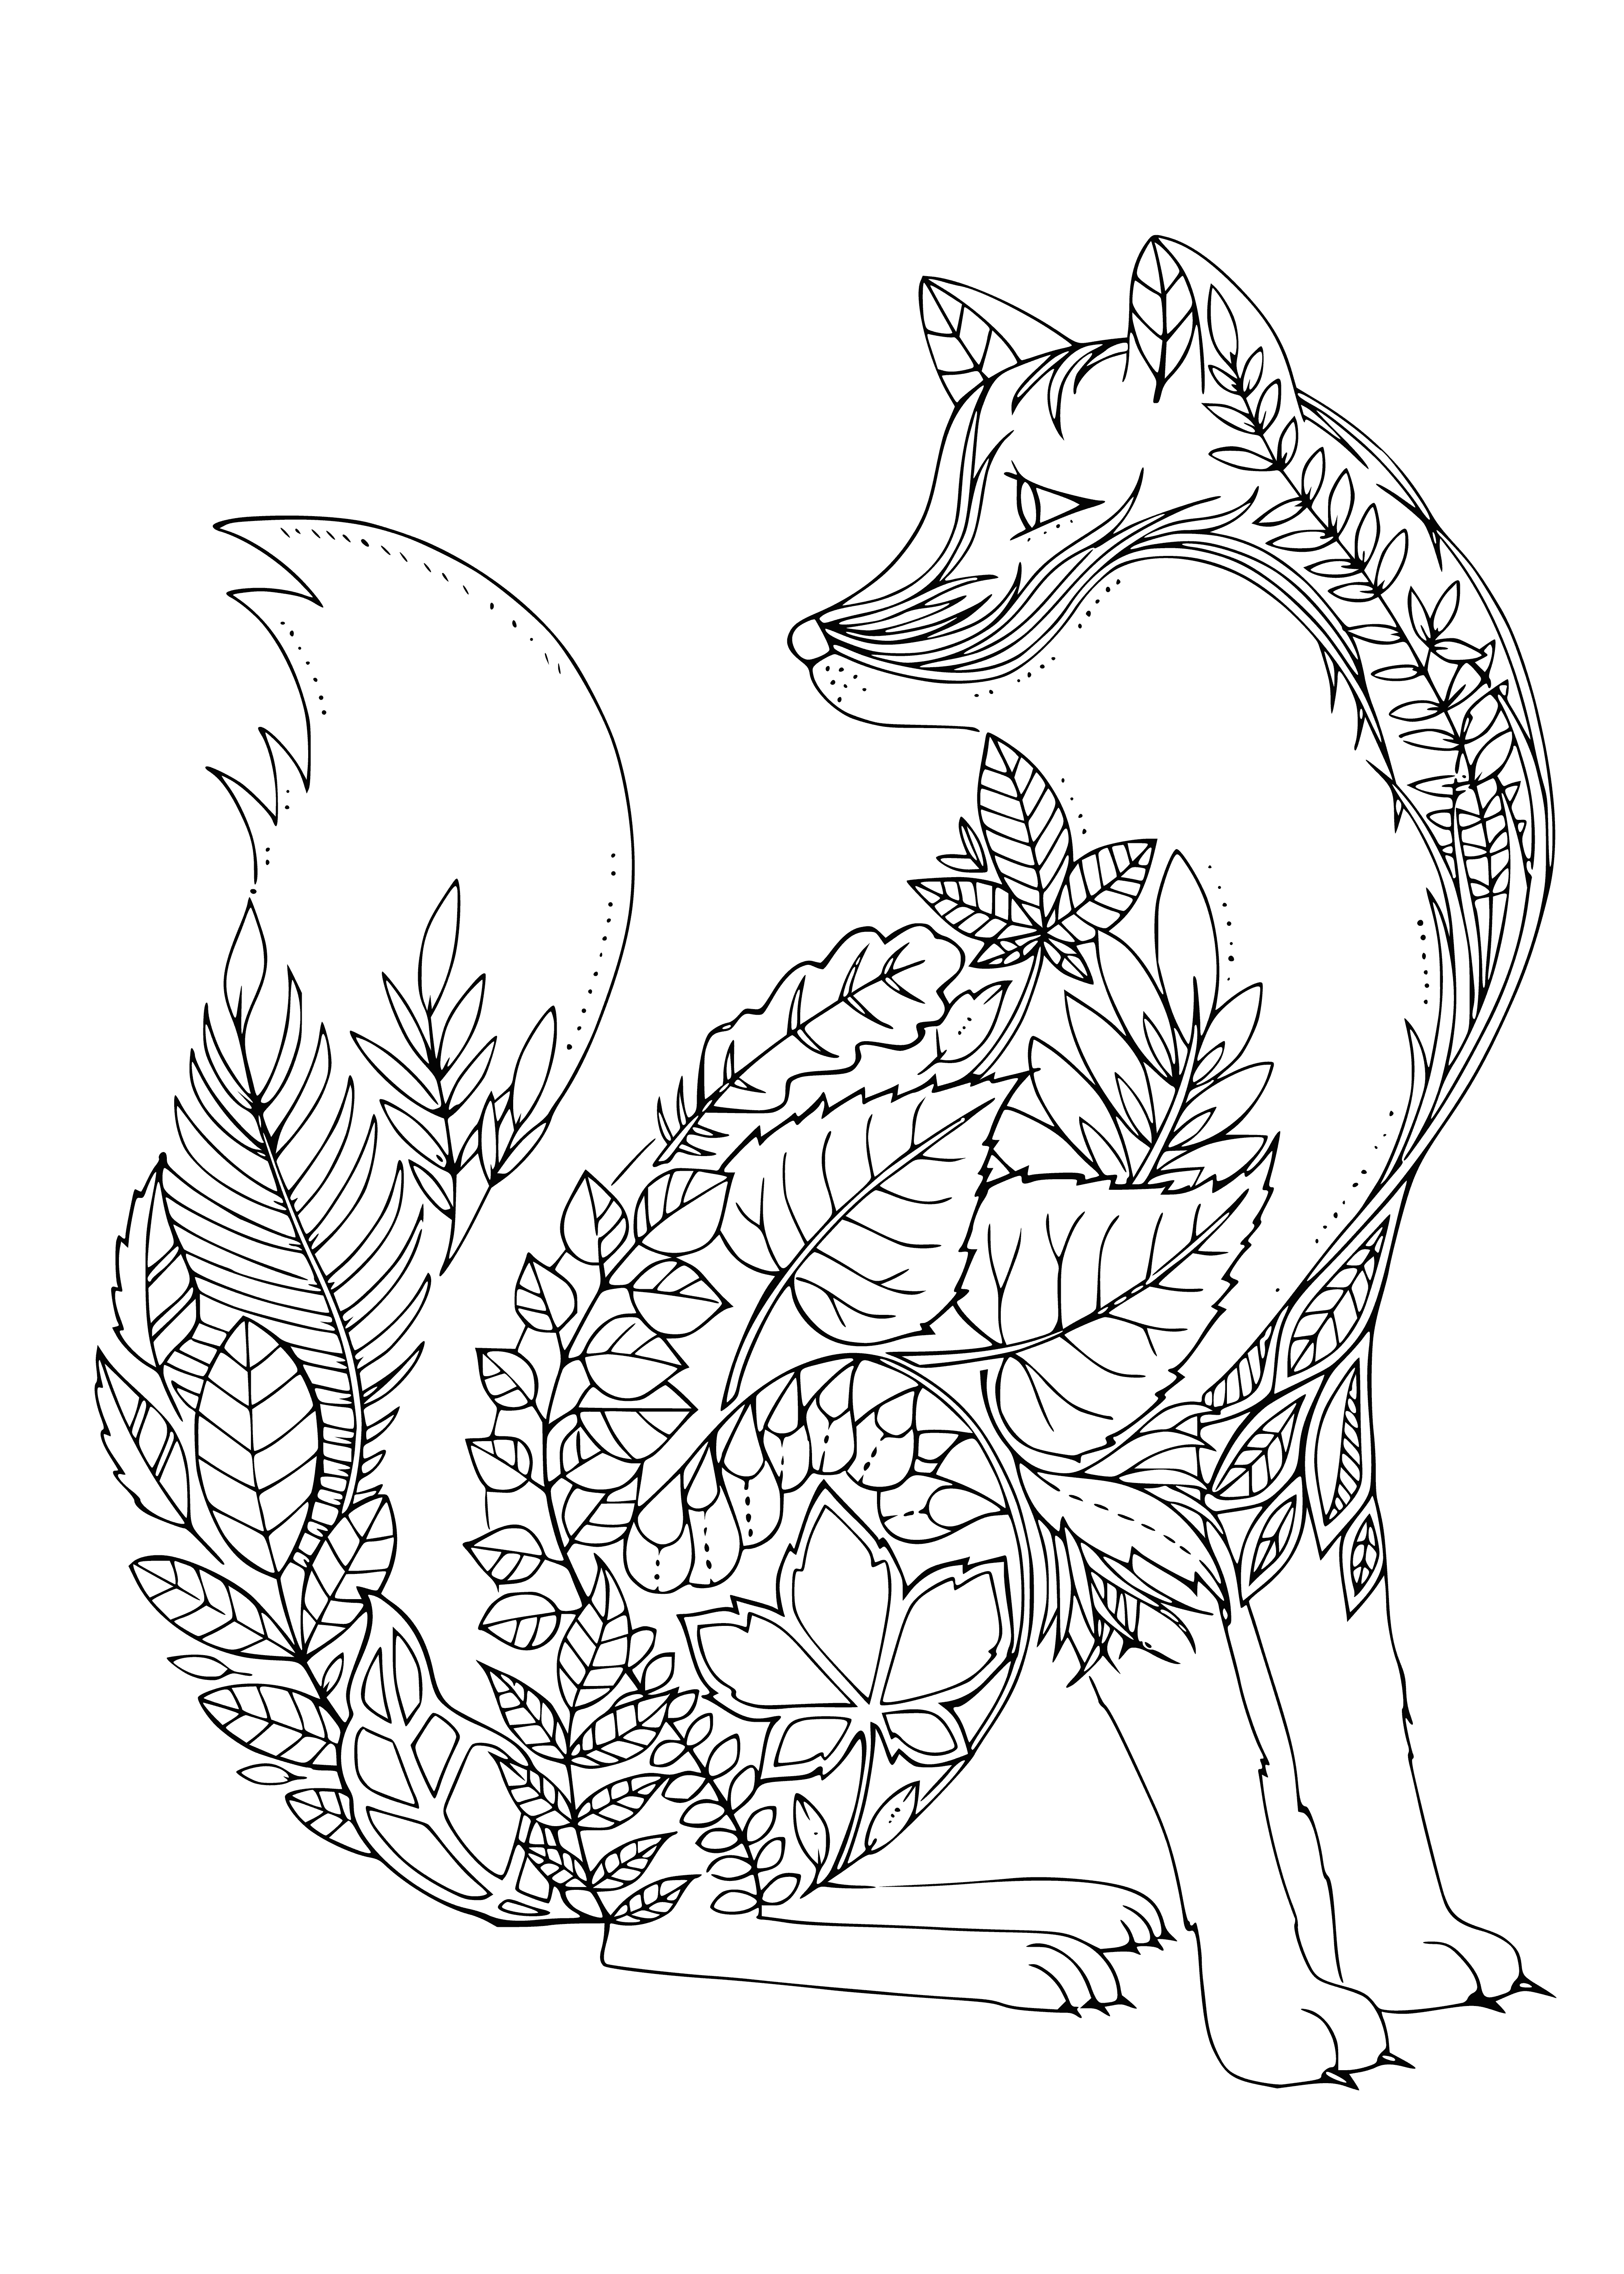 coloring page: Foxes are members of the Canidae family and have cunning, sly nature. They live 2-5 yrs in wild, up to 10 in captivity. 30+ species exist.